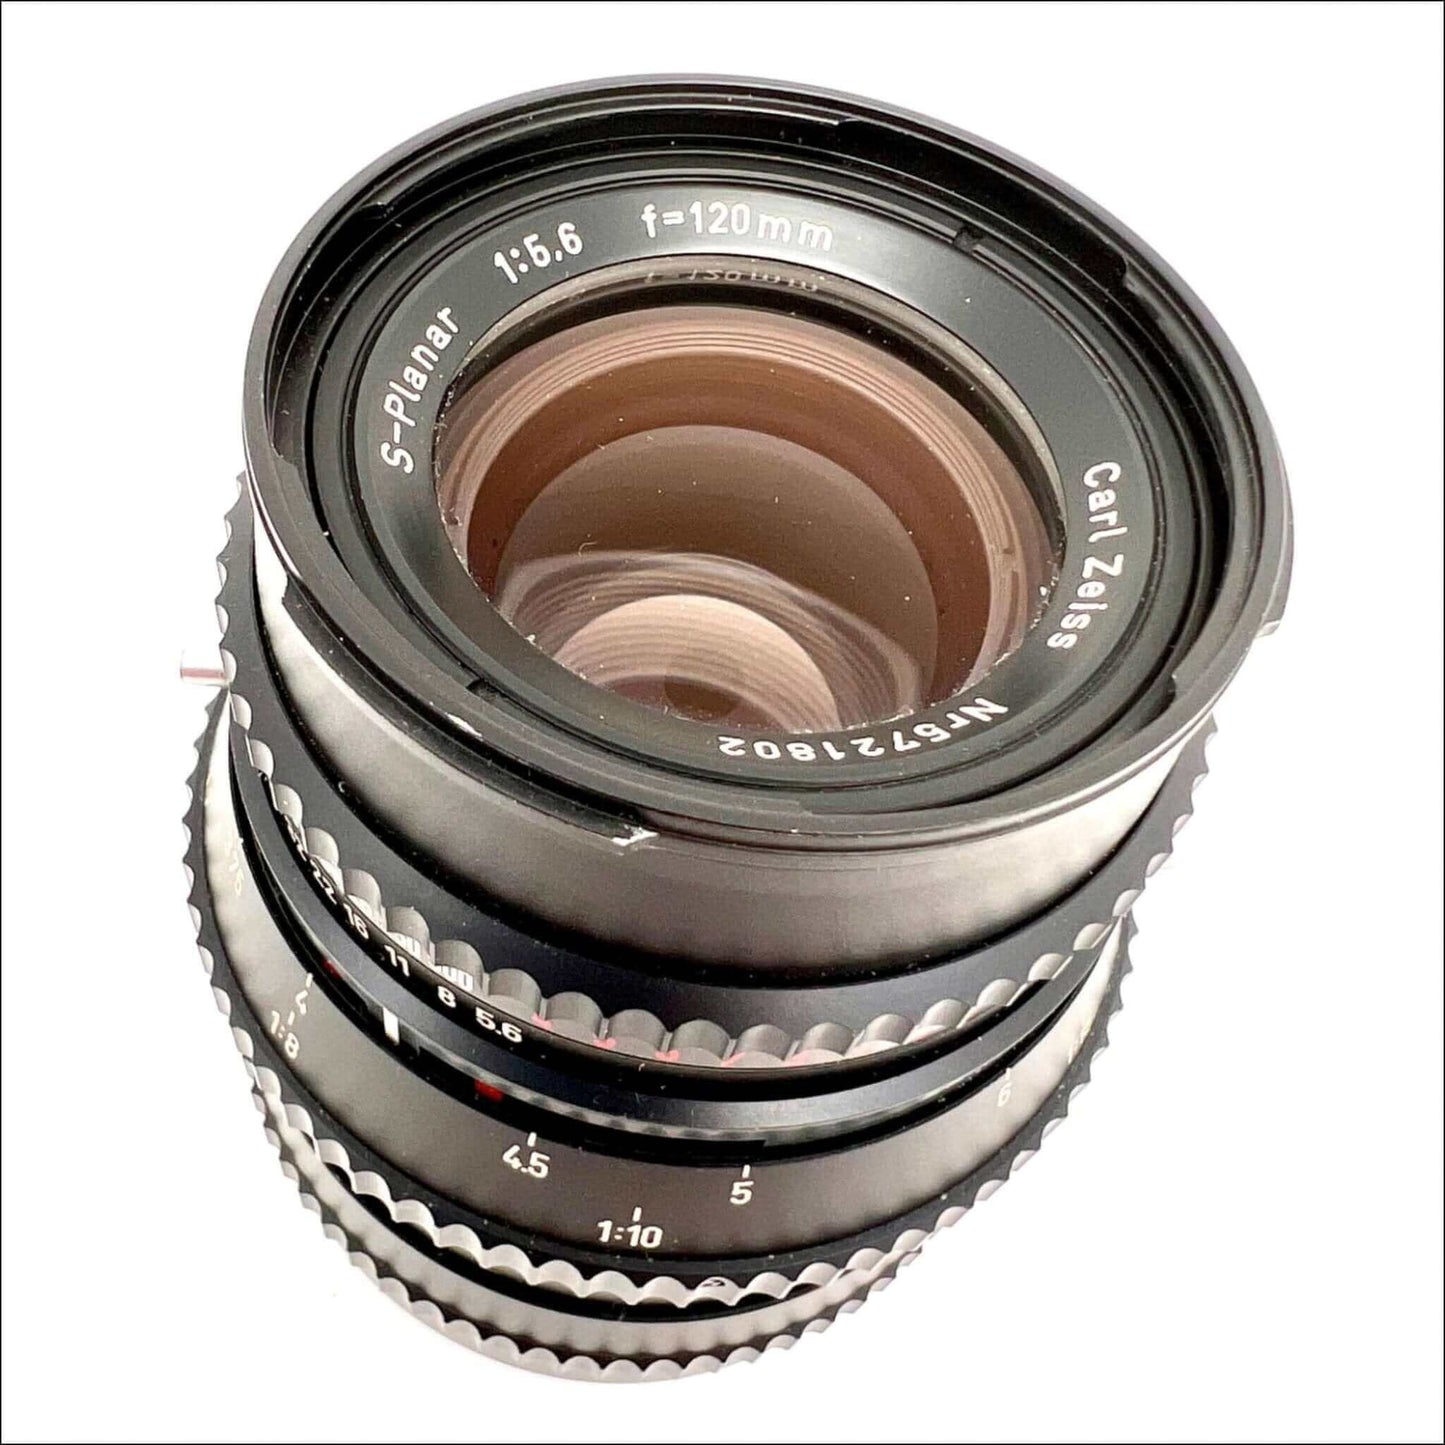 Hasselblad Used Carl Zeiss S-planar 120mm F5.6 Lens